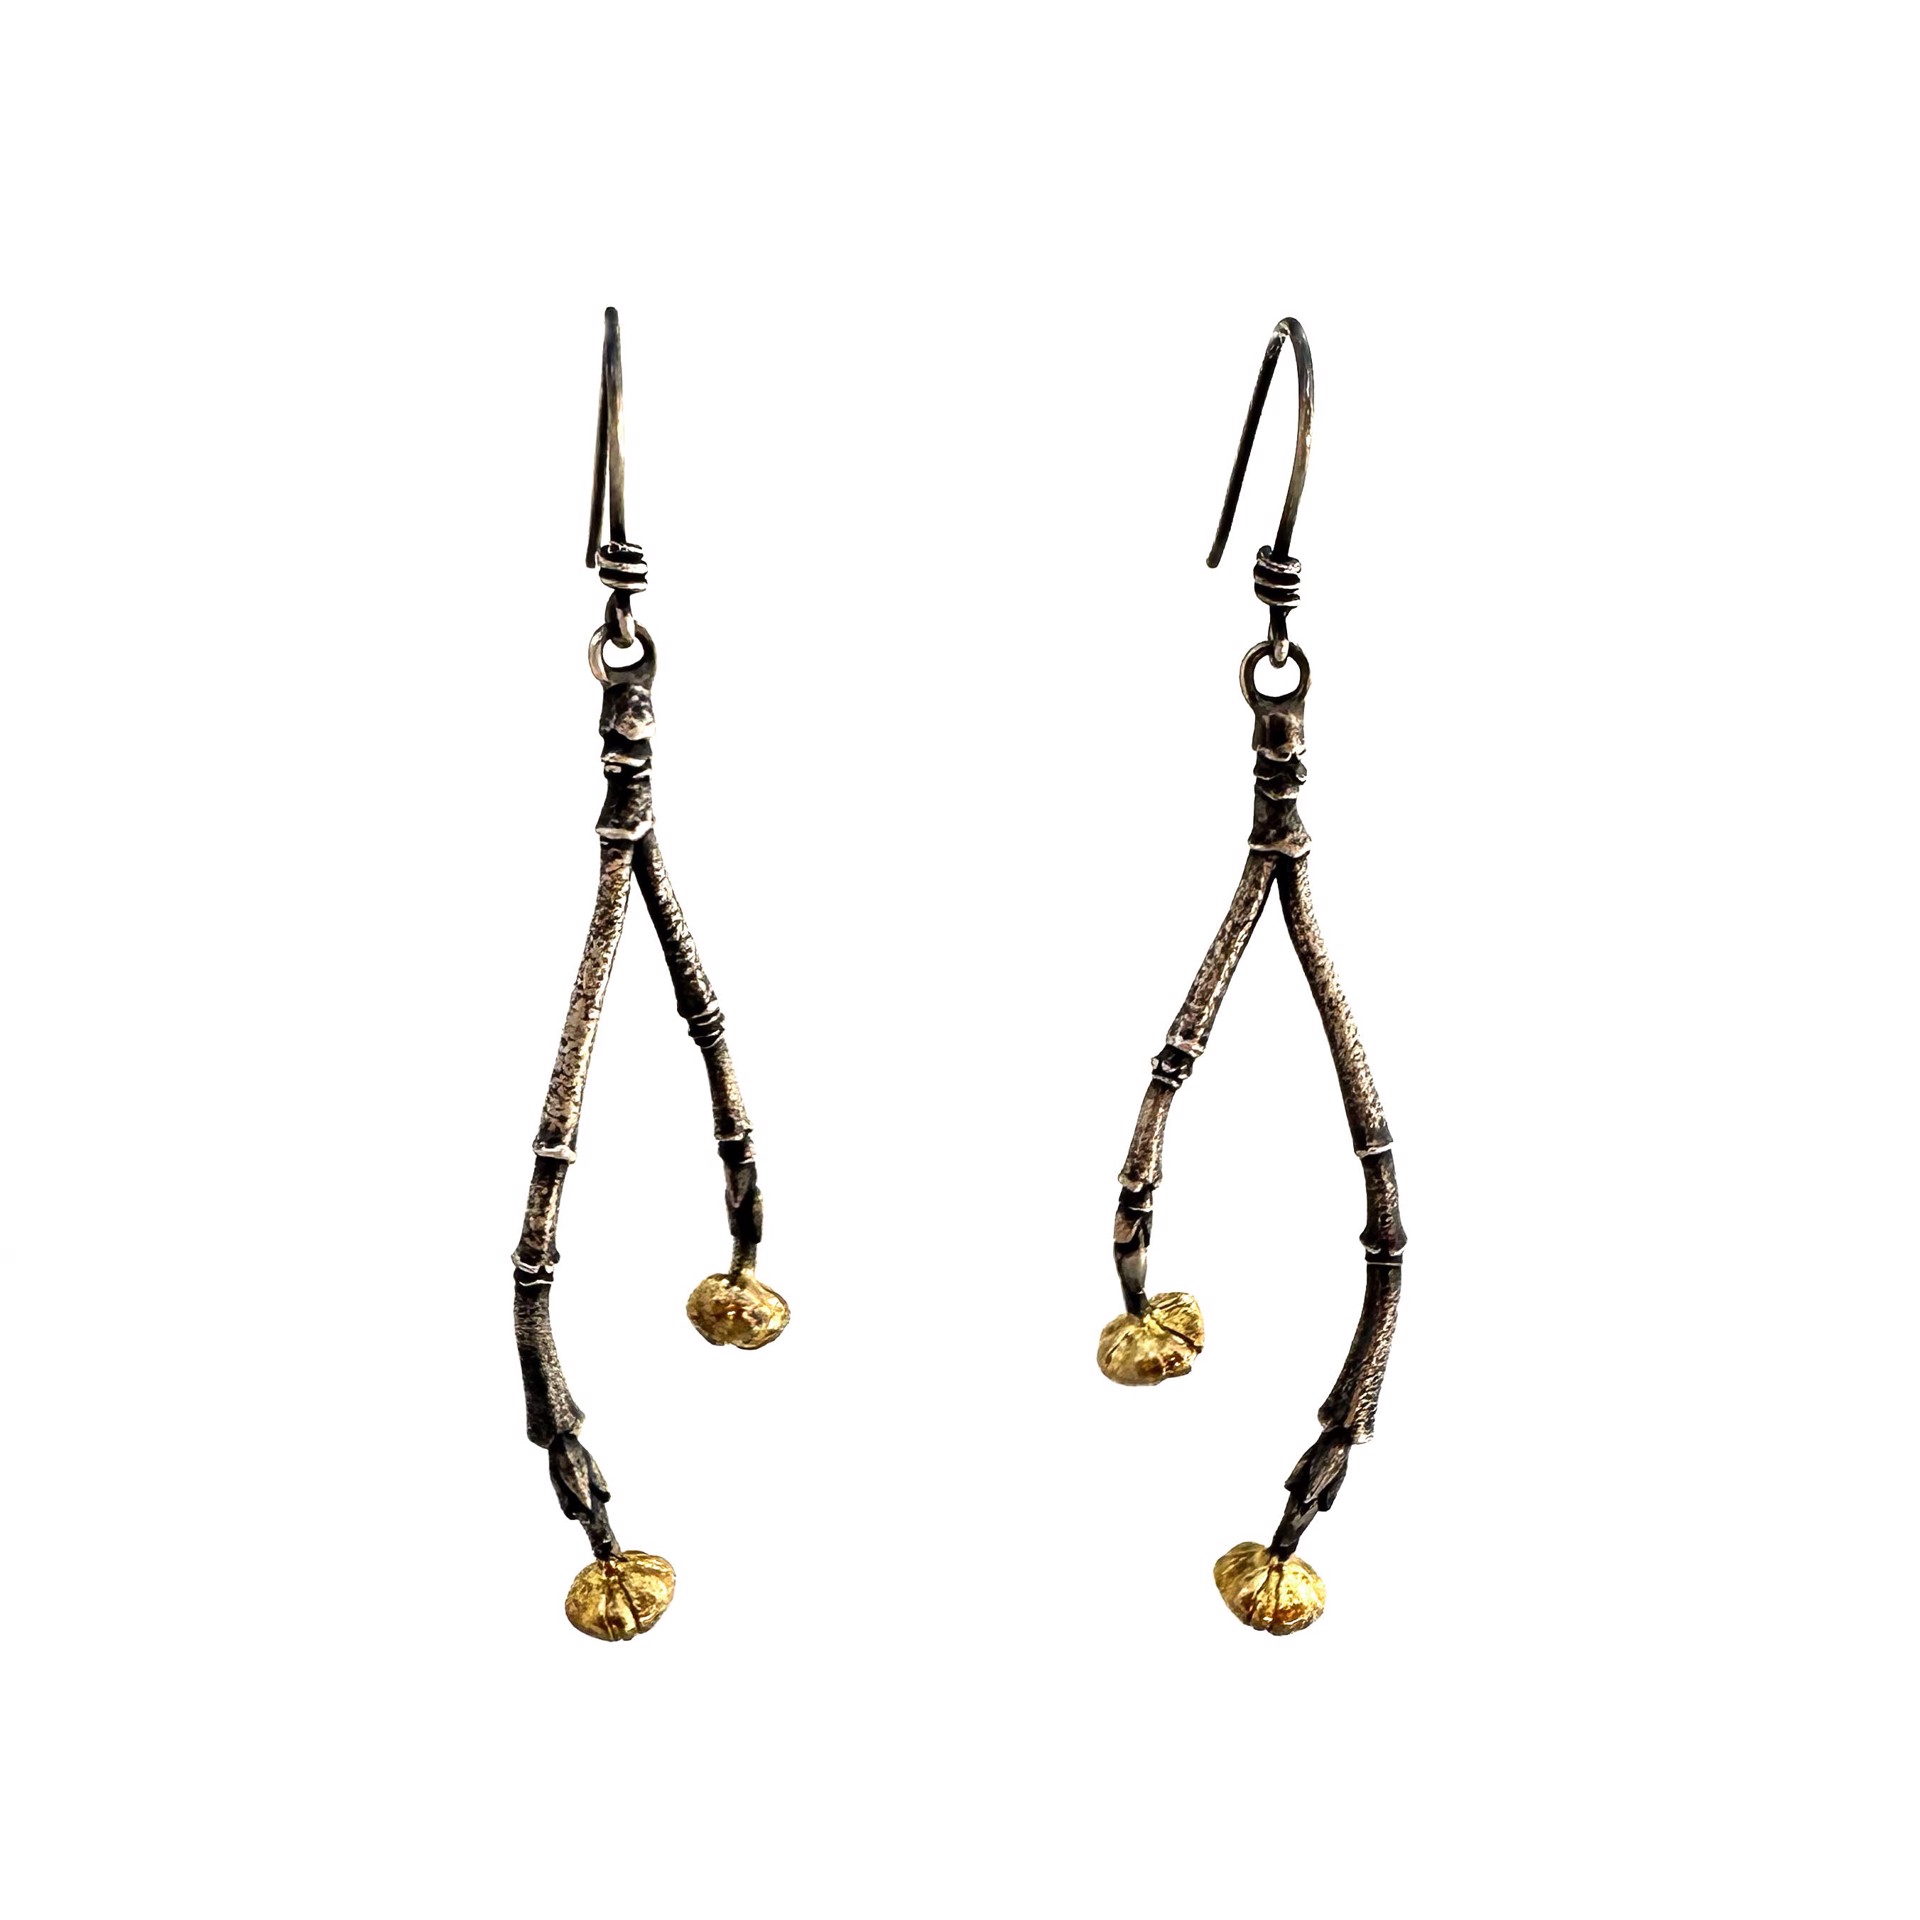 Linden earrings w/ 24 k by Sara Thompson